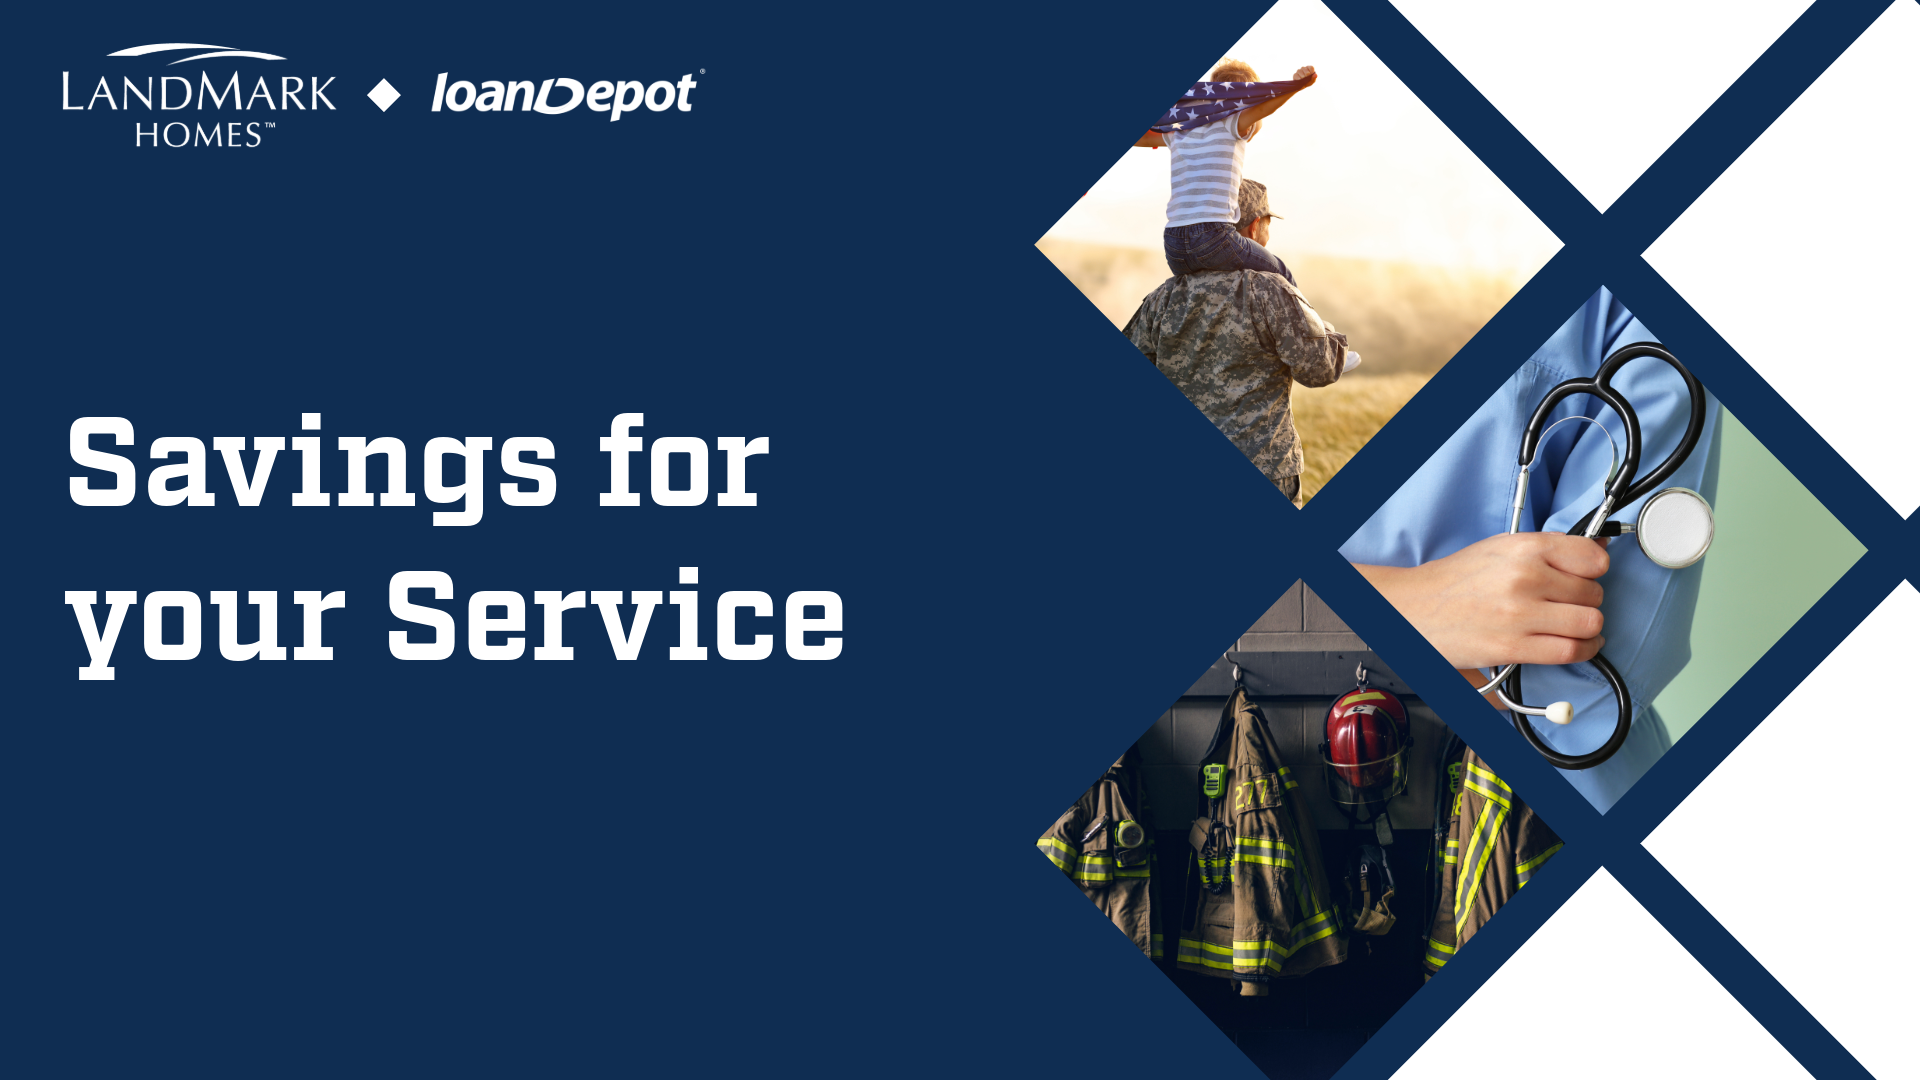 Savings for your Service: Announcing our First Responder and Military Savings Program